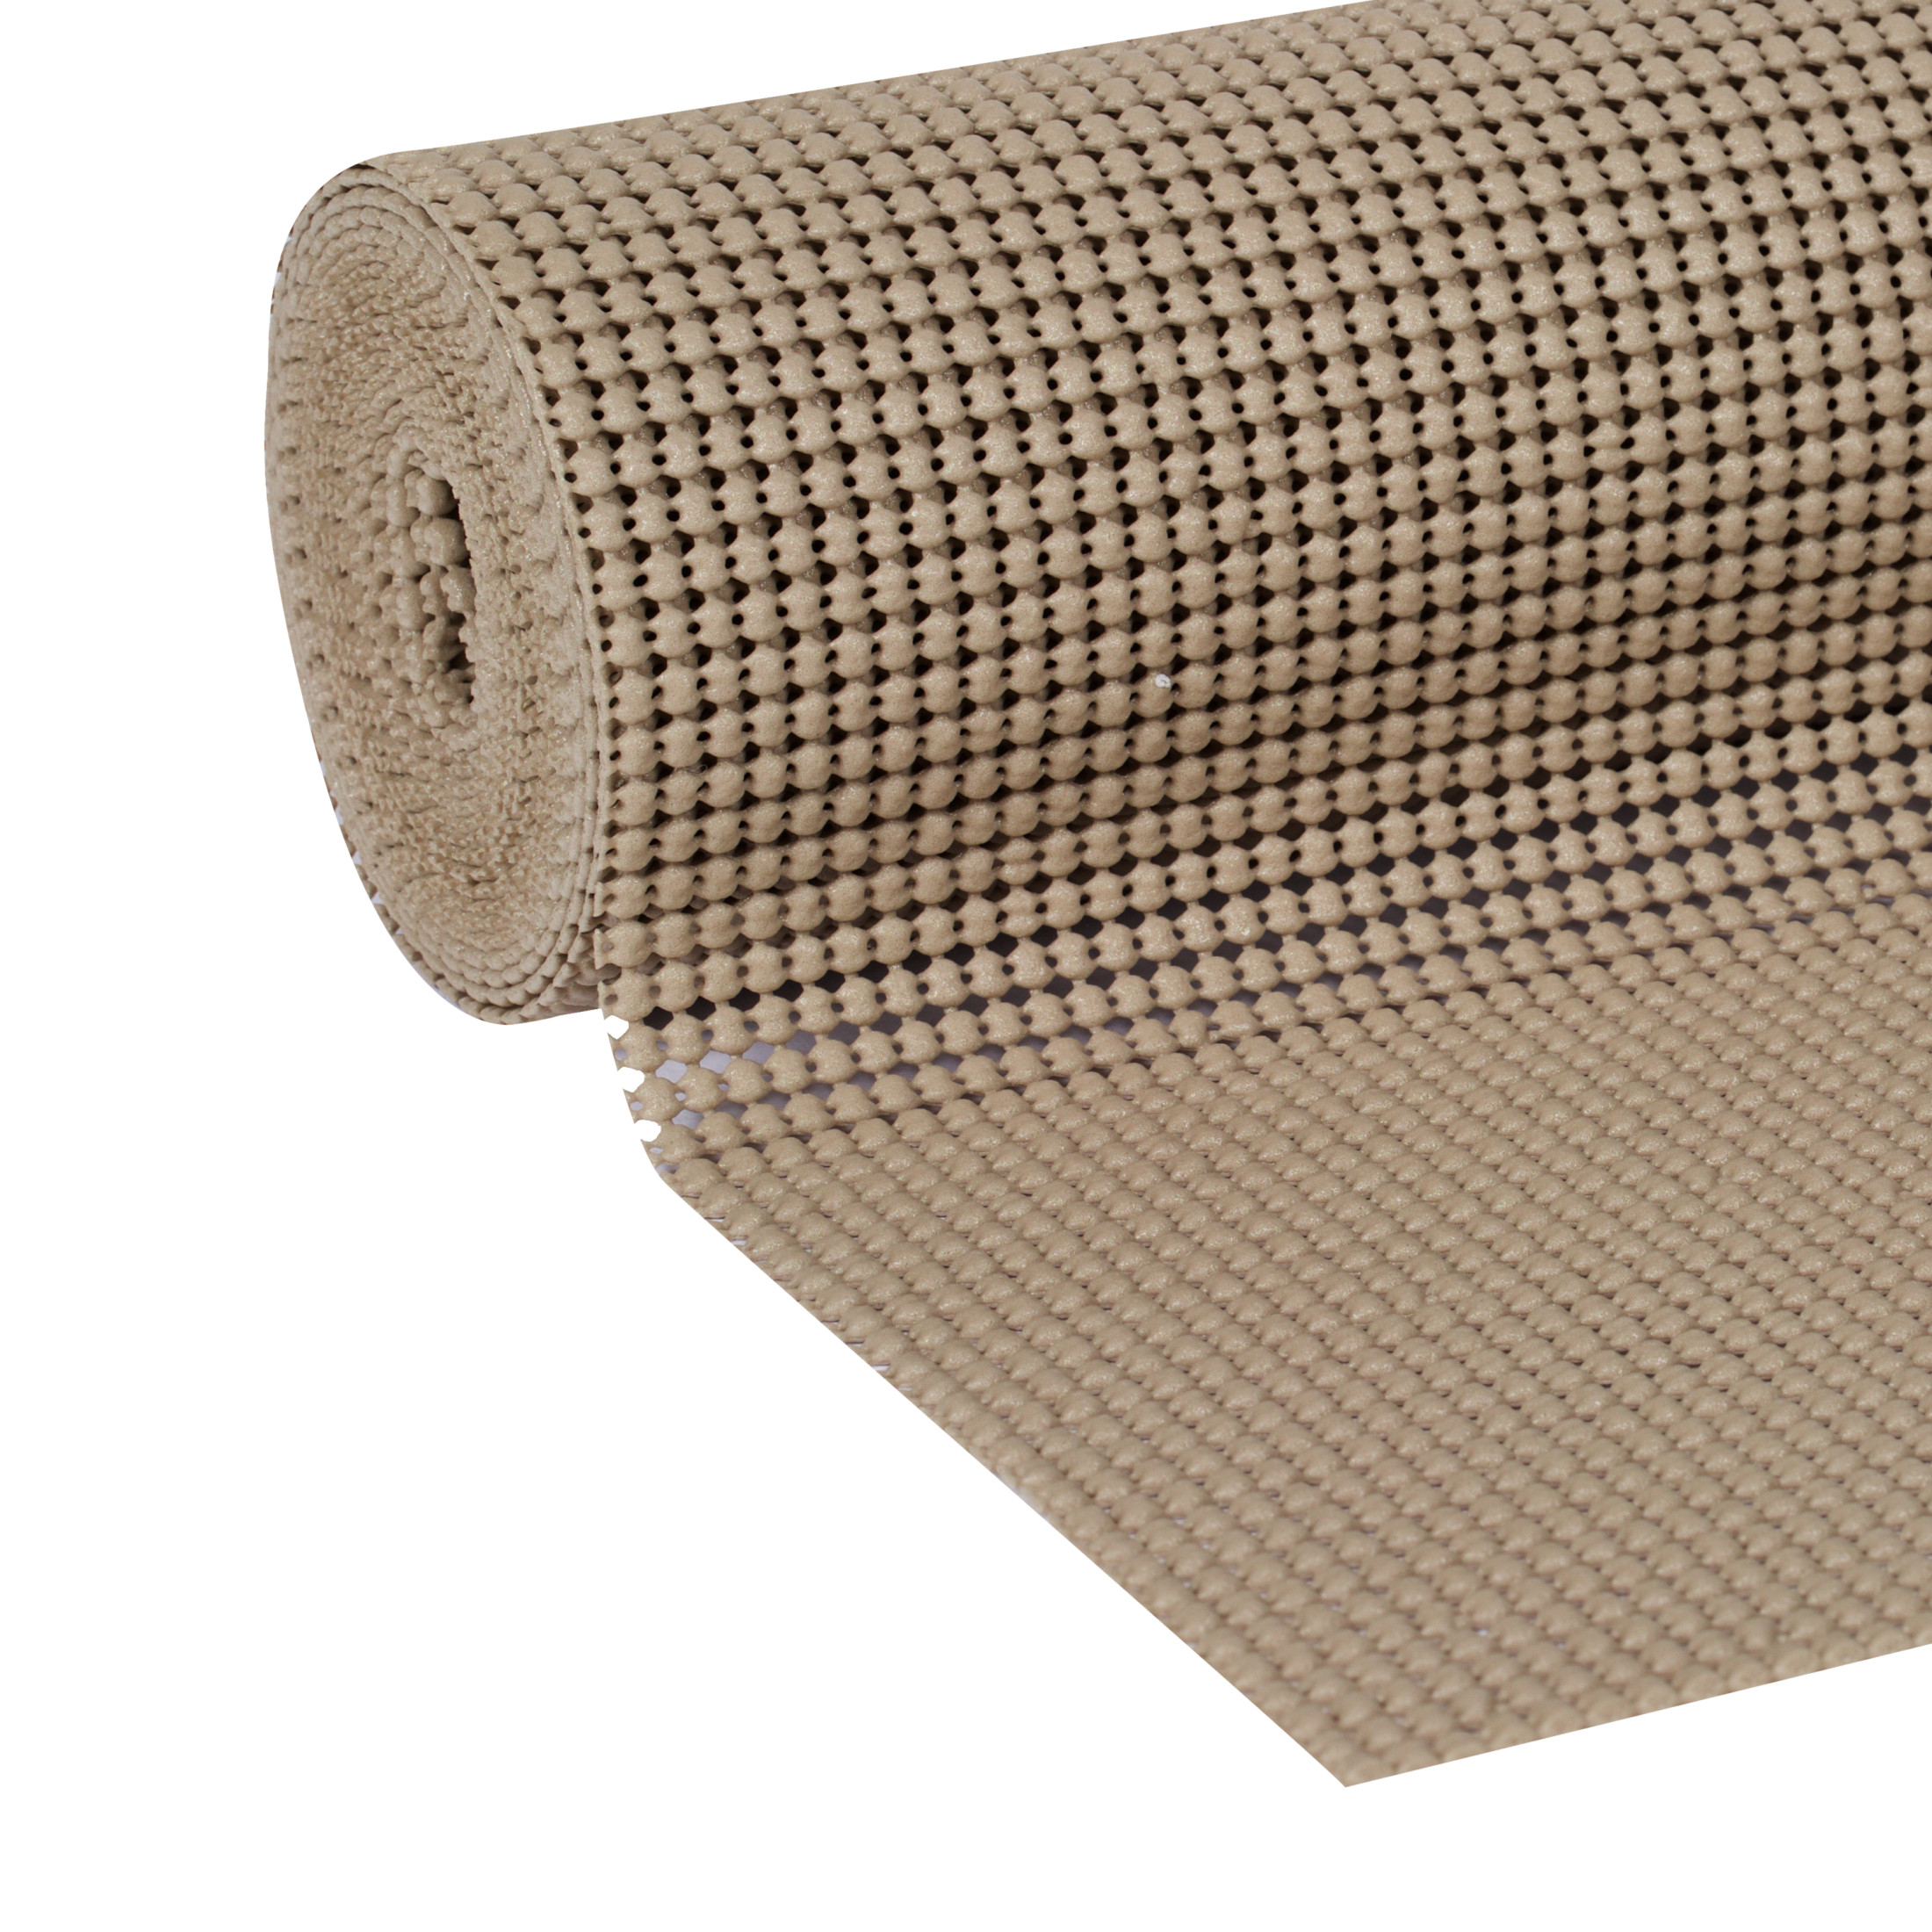 EasyLiner Select Grip Shelf Liner, Taupe, 12 in. x 10 ft. Roll - image 1 of 11